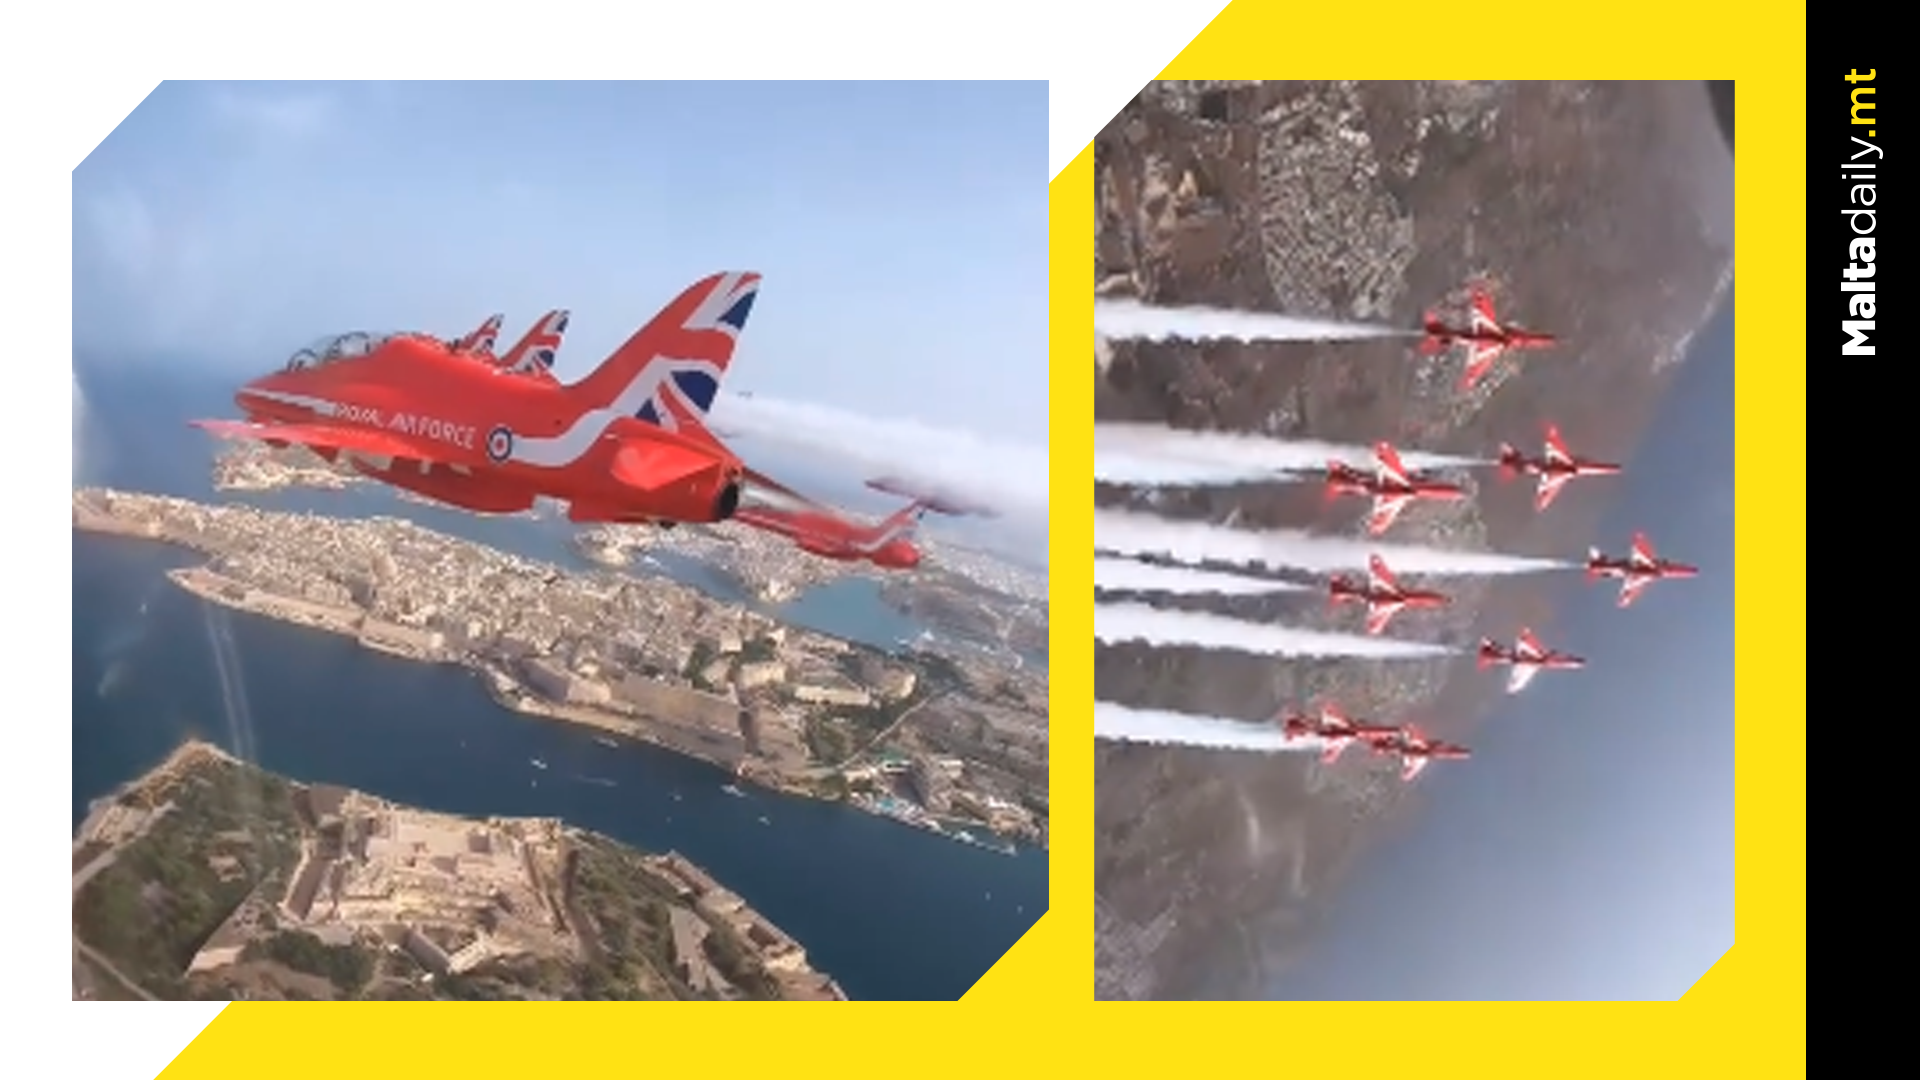 The Red Arrows Return to Malta for the Thrilling Malta International Airshow